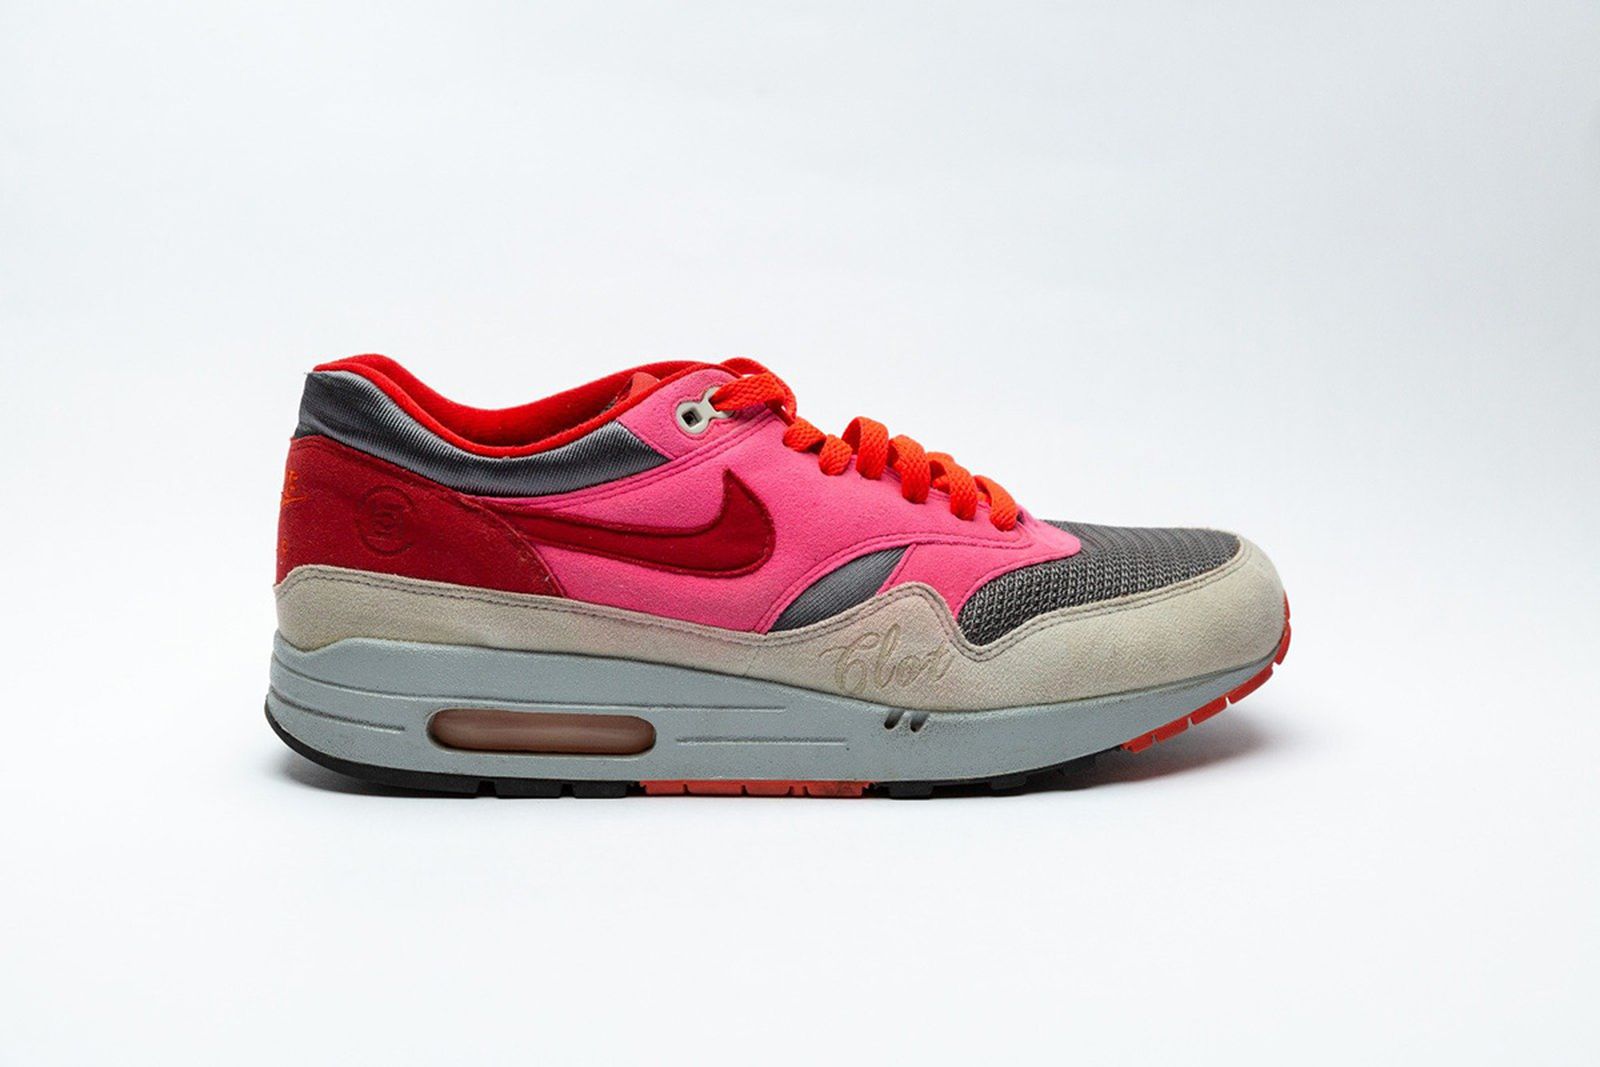 clot-nike-air-max-1-kod-solar-red-release-date-price-1-01